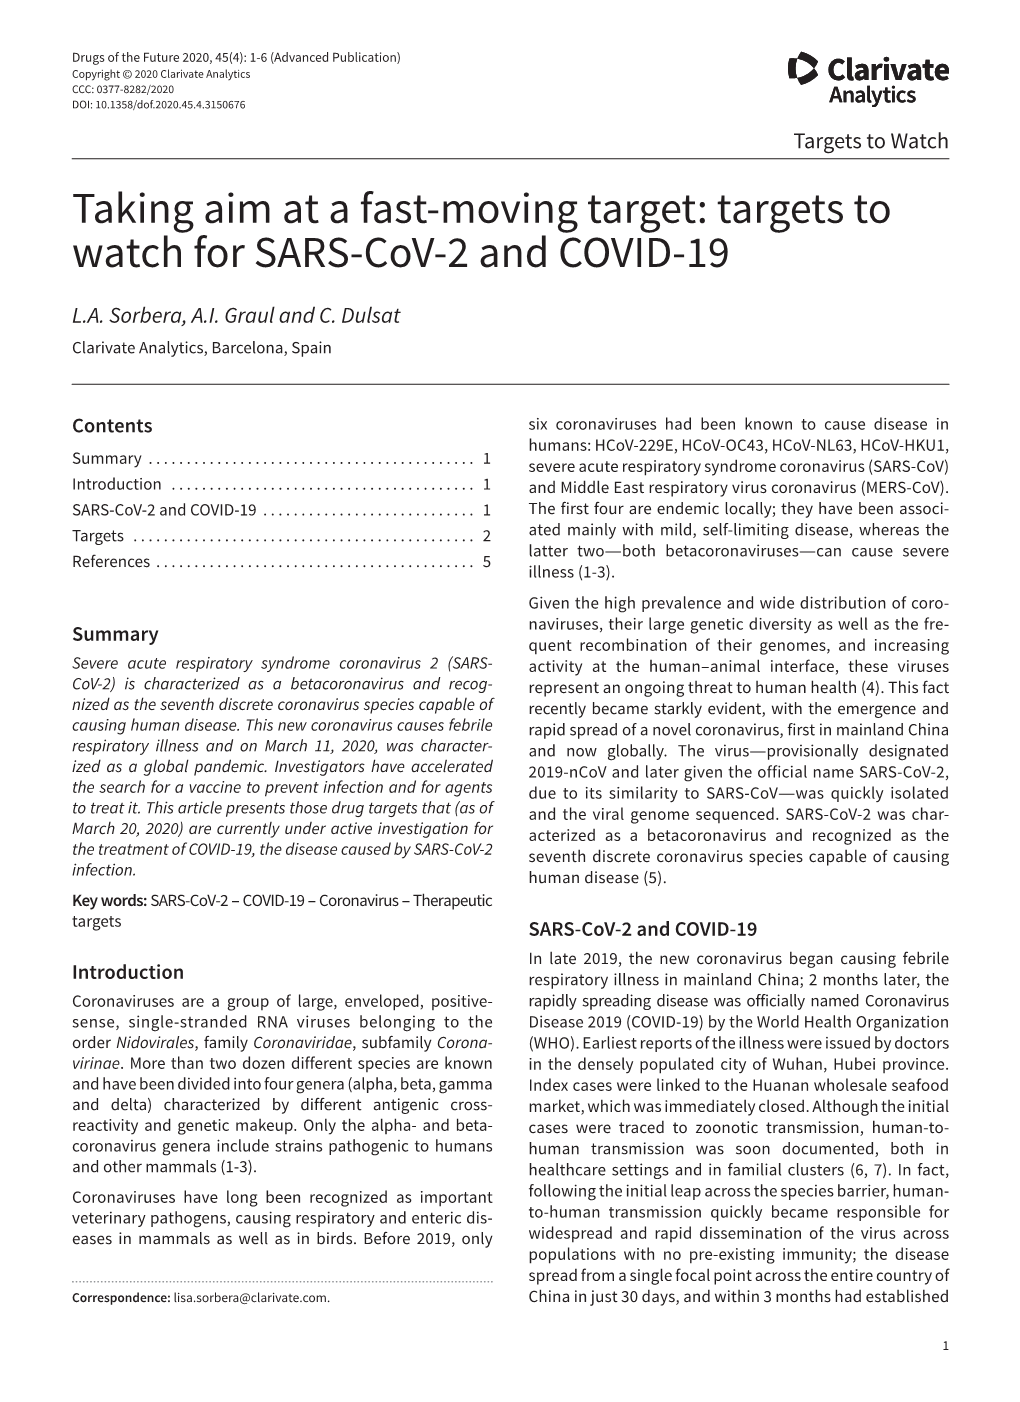 Targets to Watch for SARS-Cov-2 and COVID-19